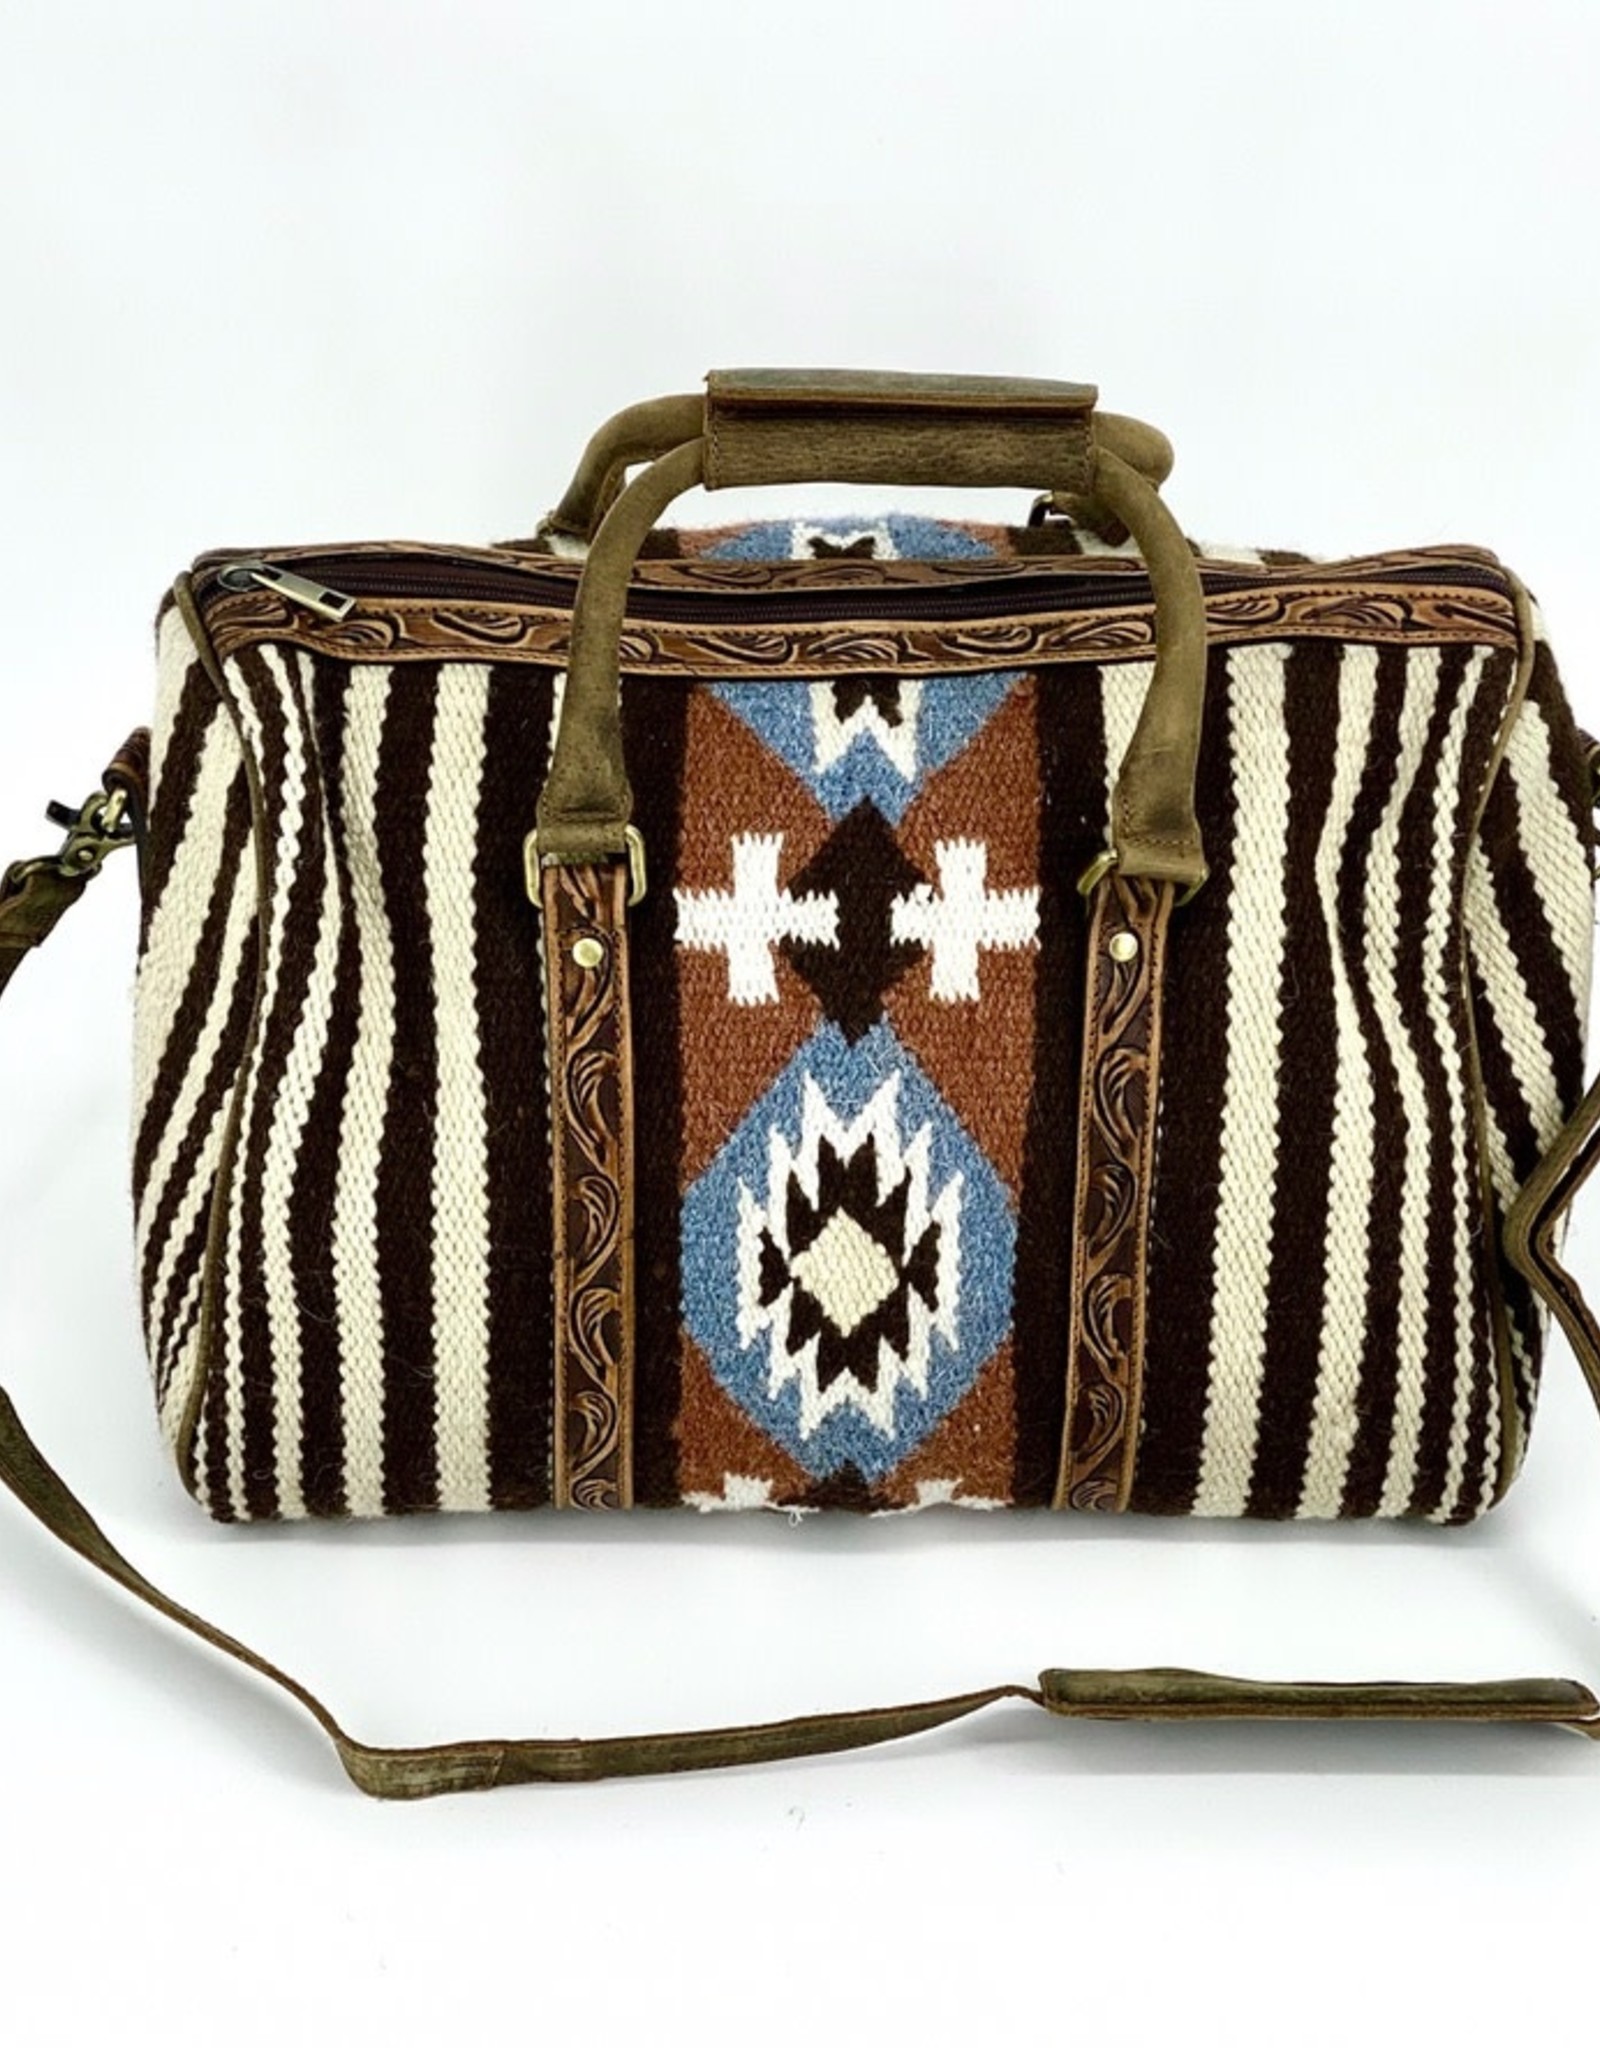 PURSE DUFFLE BLANKET OVERNIGHT BAG AZTEC BROWN/BLUE W/TOOLED LEATHER